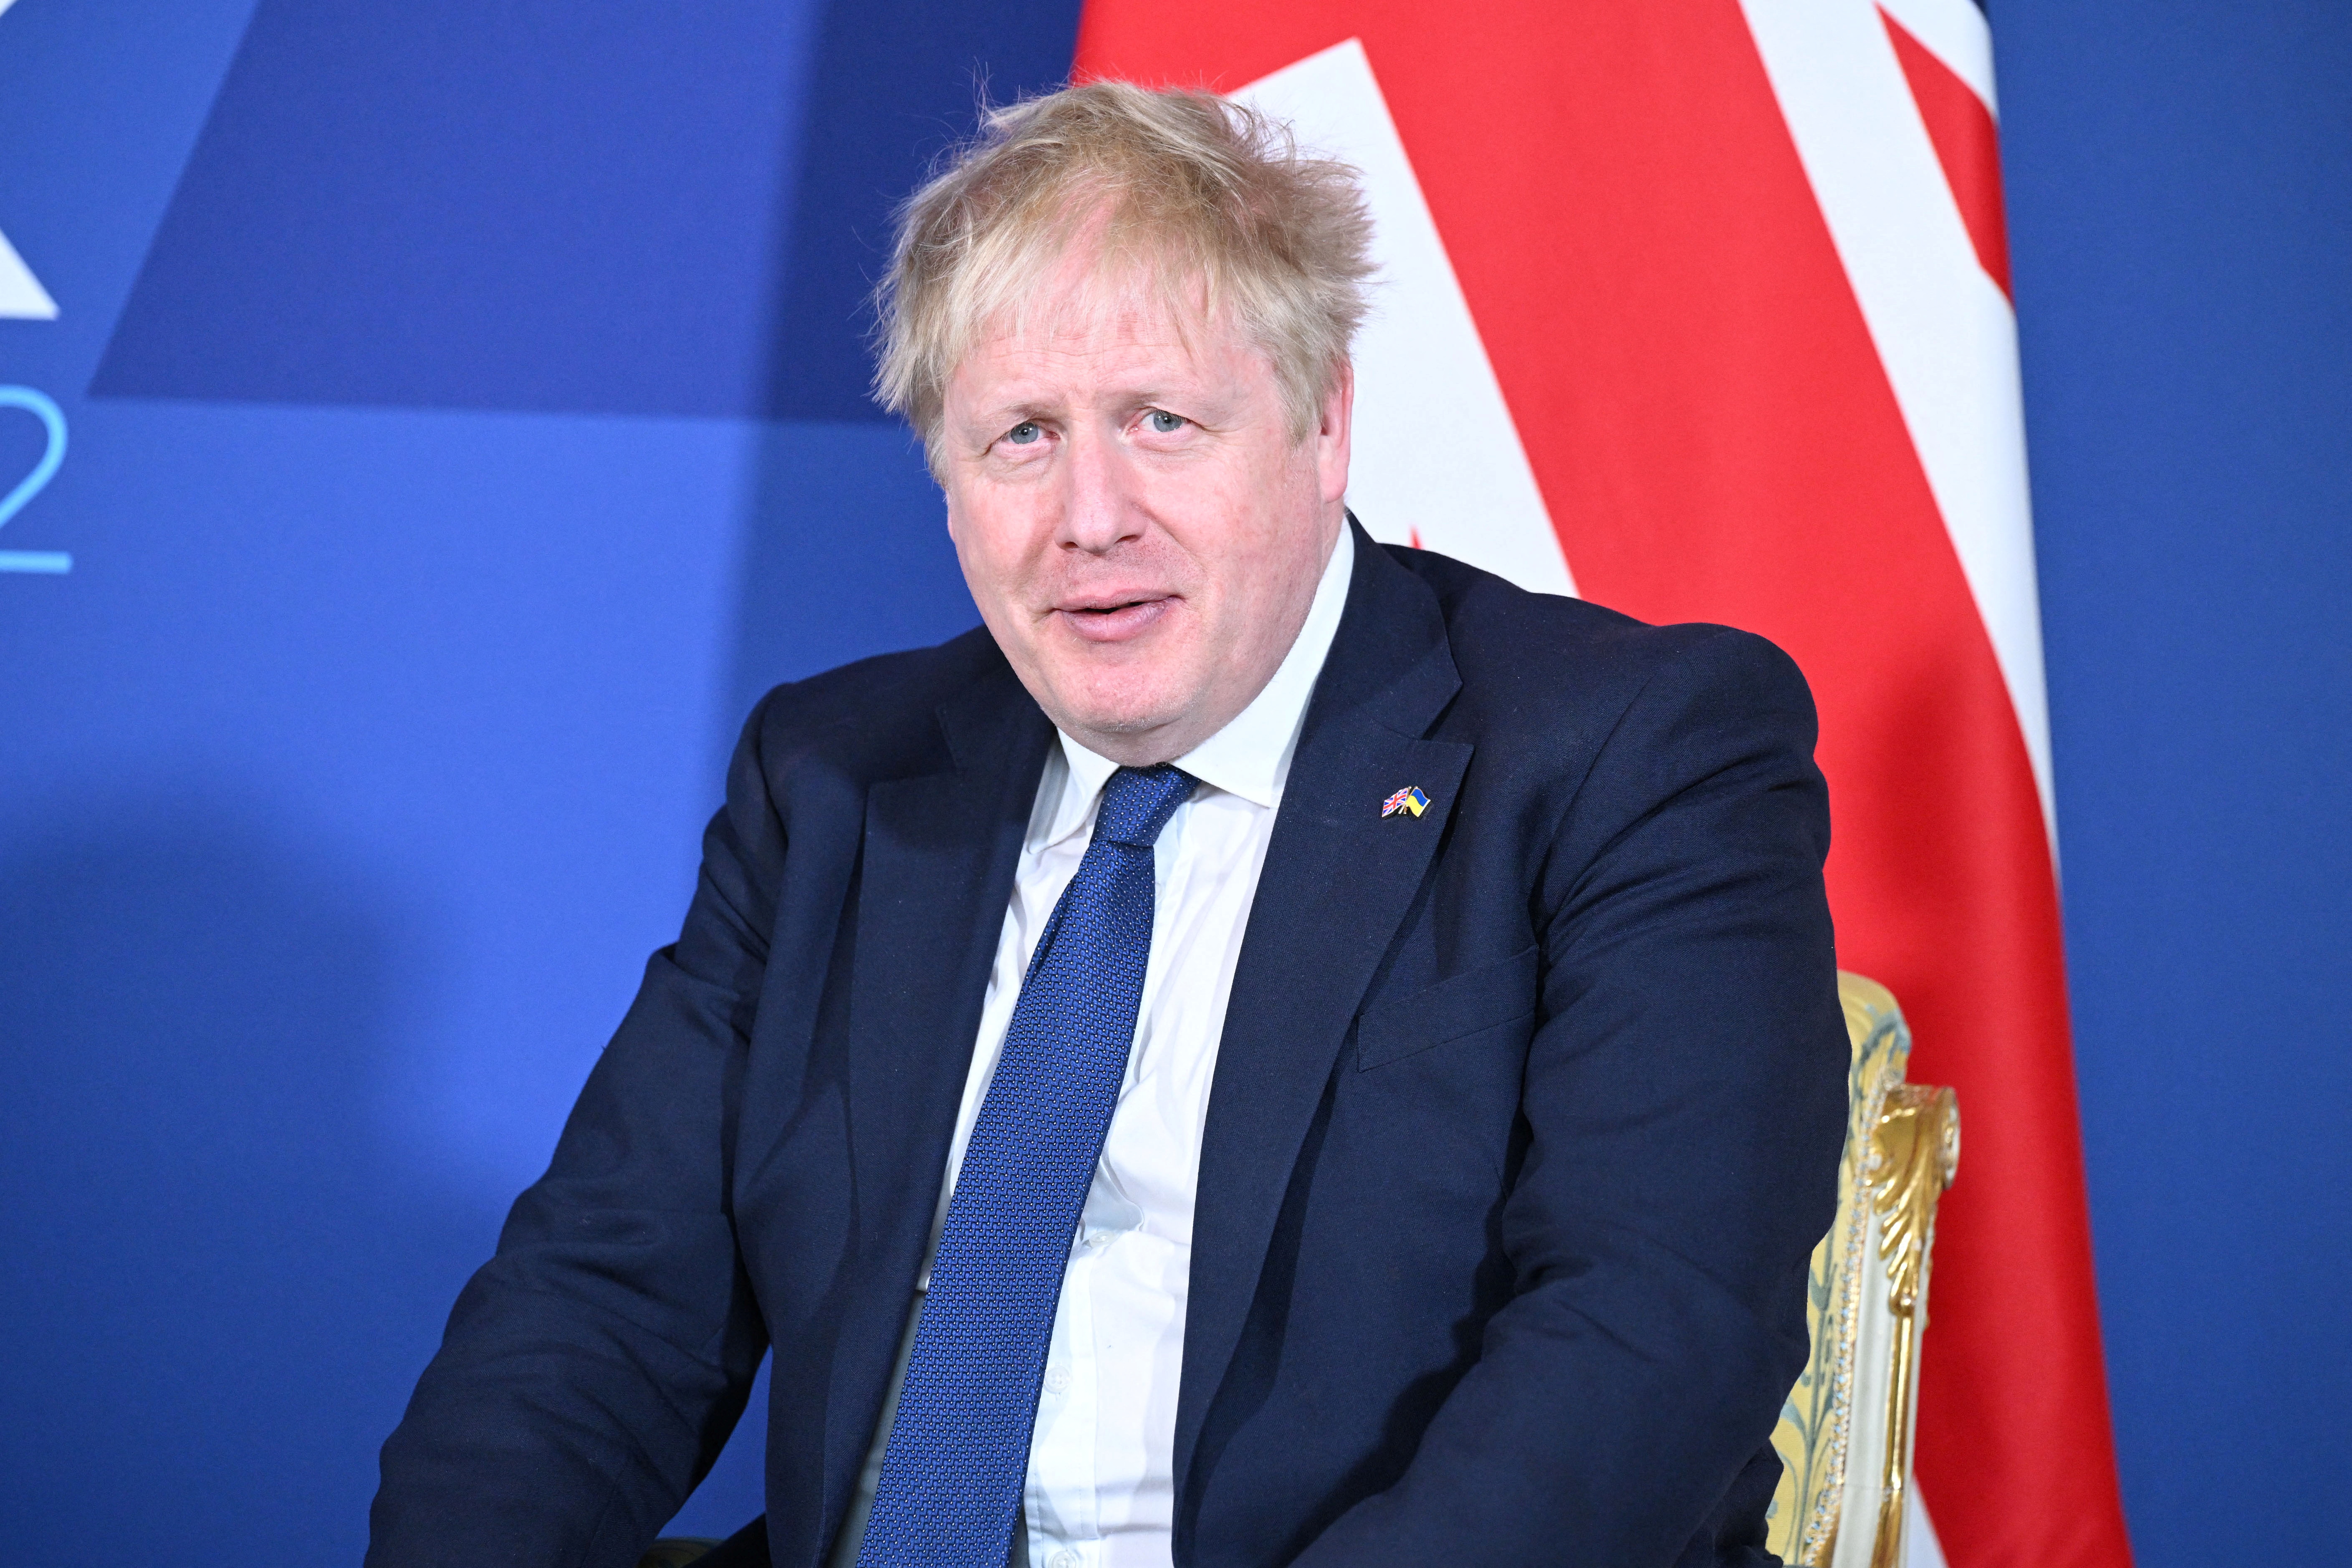 British PM Johnson meets leaders of V4 group in London